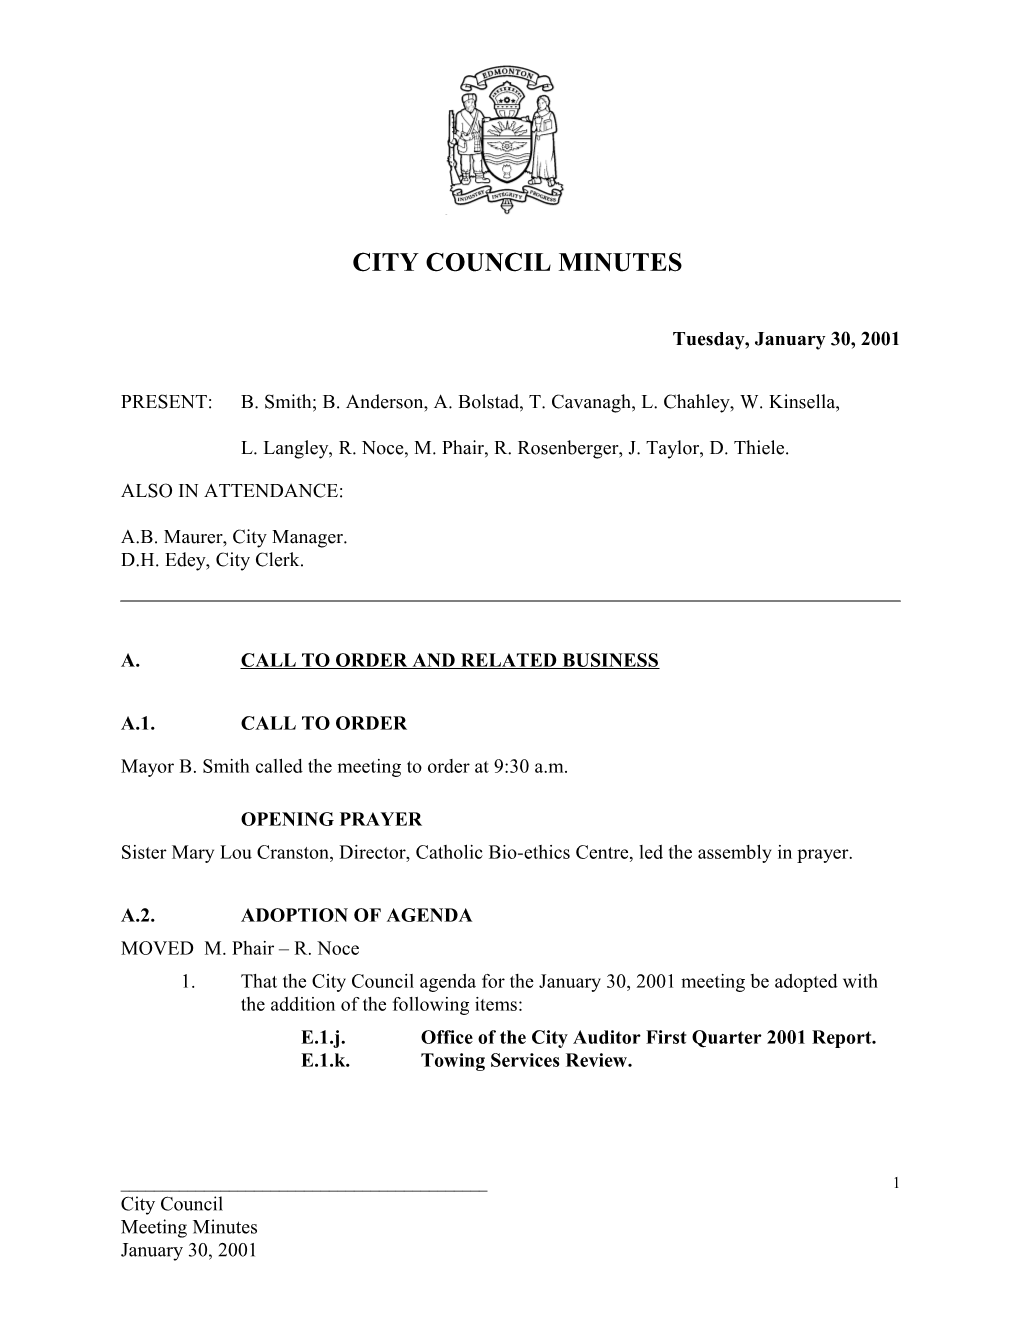 Minutes for City Council January 30, 2001 Meeting